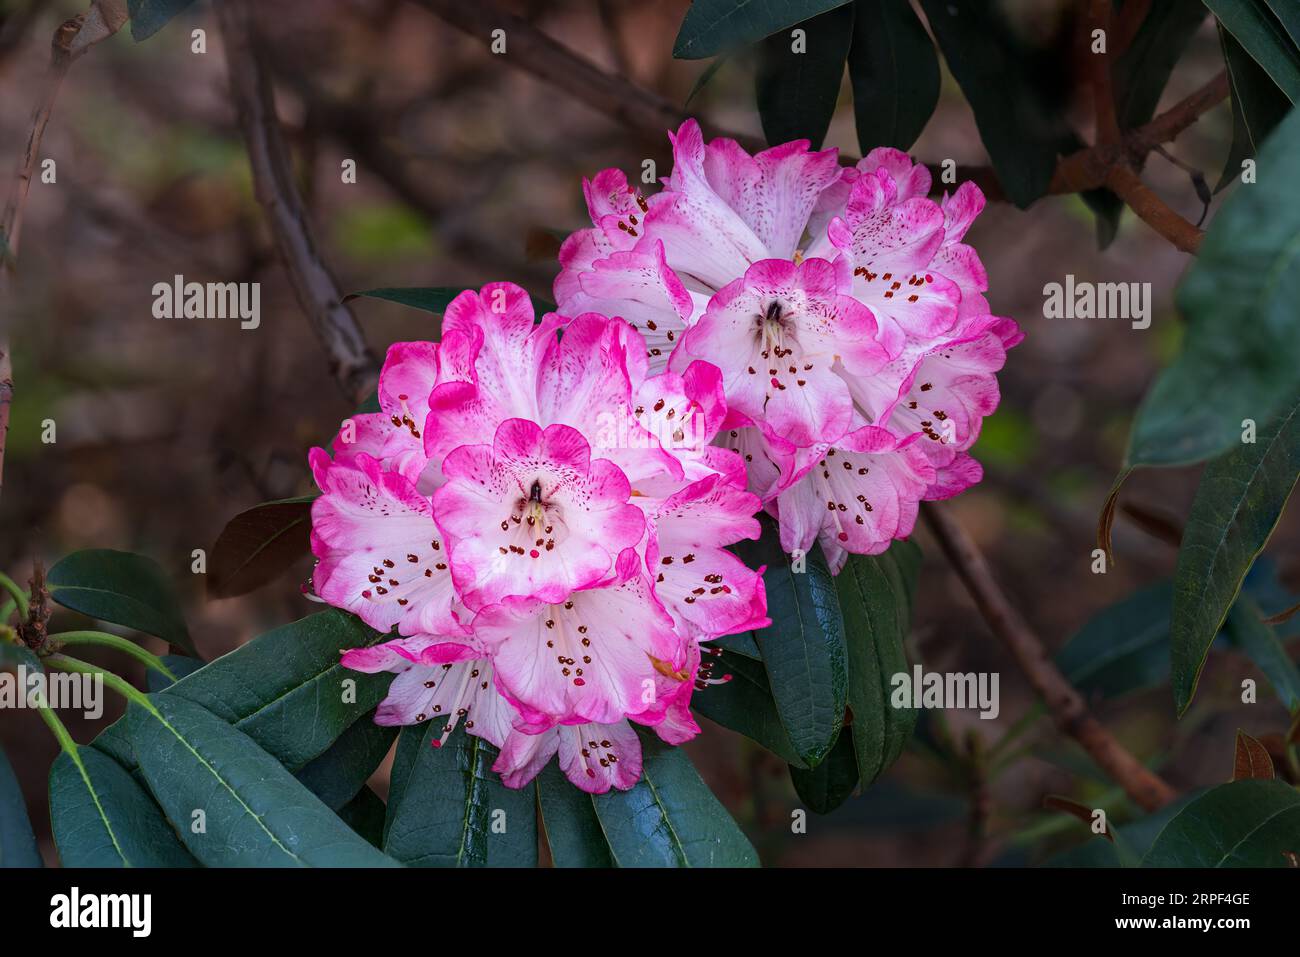 Closeup of pink rhododendron flowers in the Finnerty Gardens, Victoria, Vancouver Island, British Columbia, Canada. Stock Photo